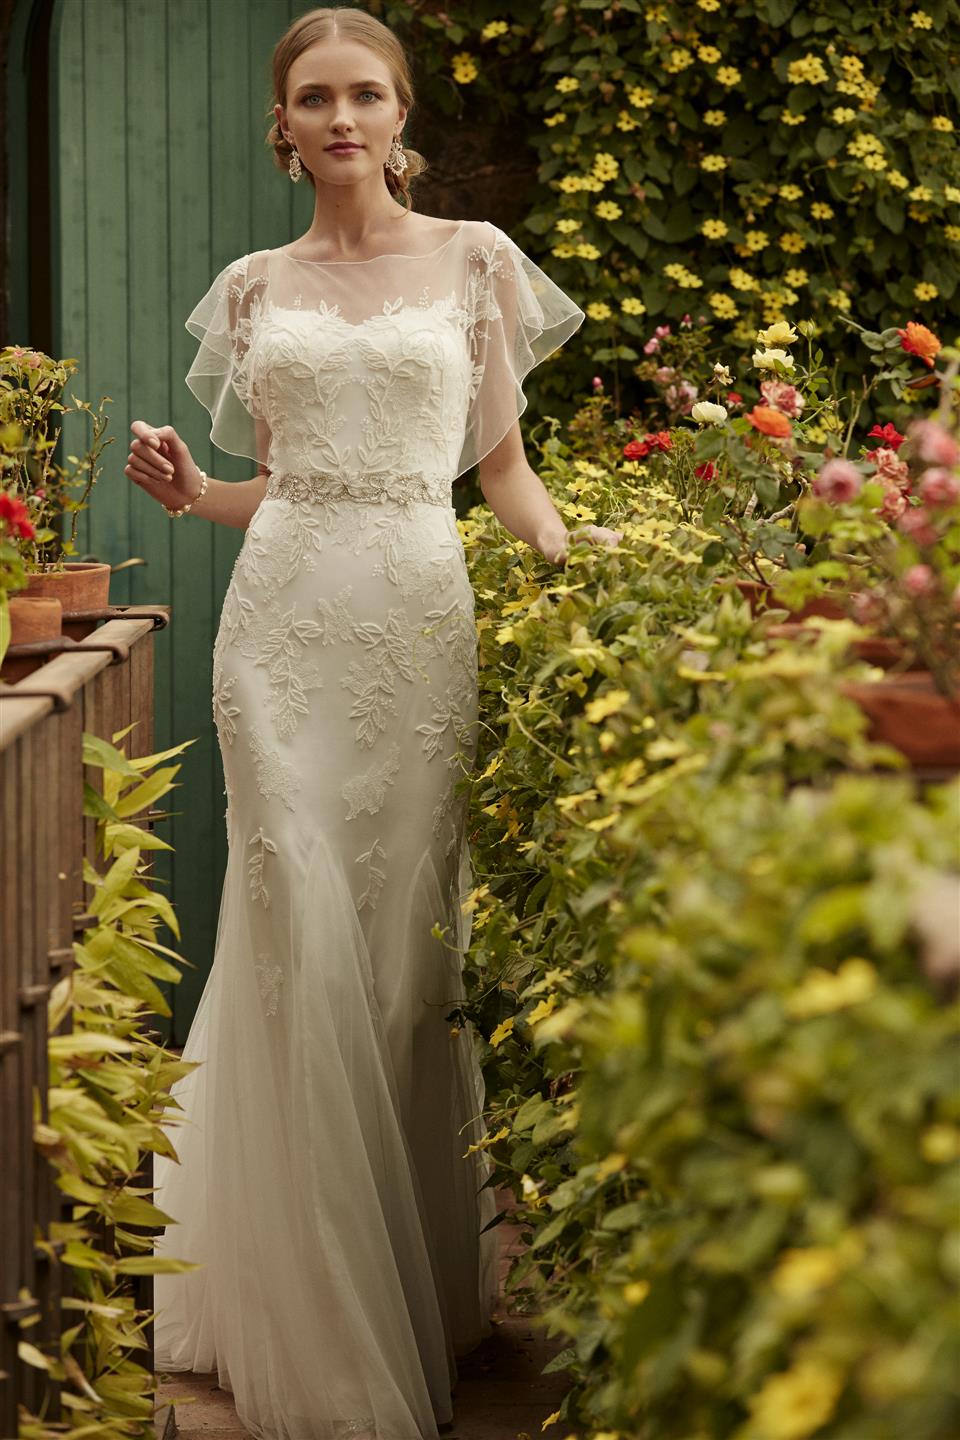 Bettina Wedding Dress from BHLDN's Spring 2015 Bridal Collection